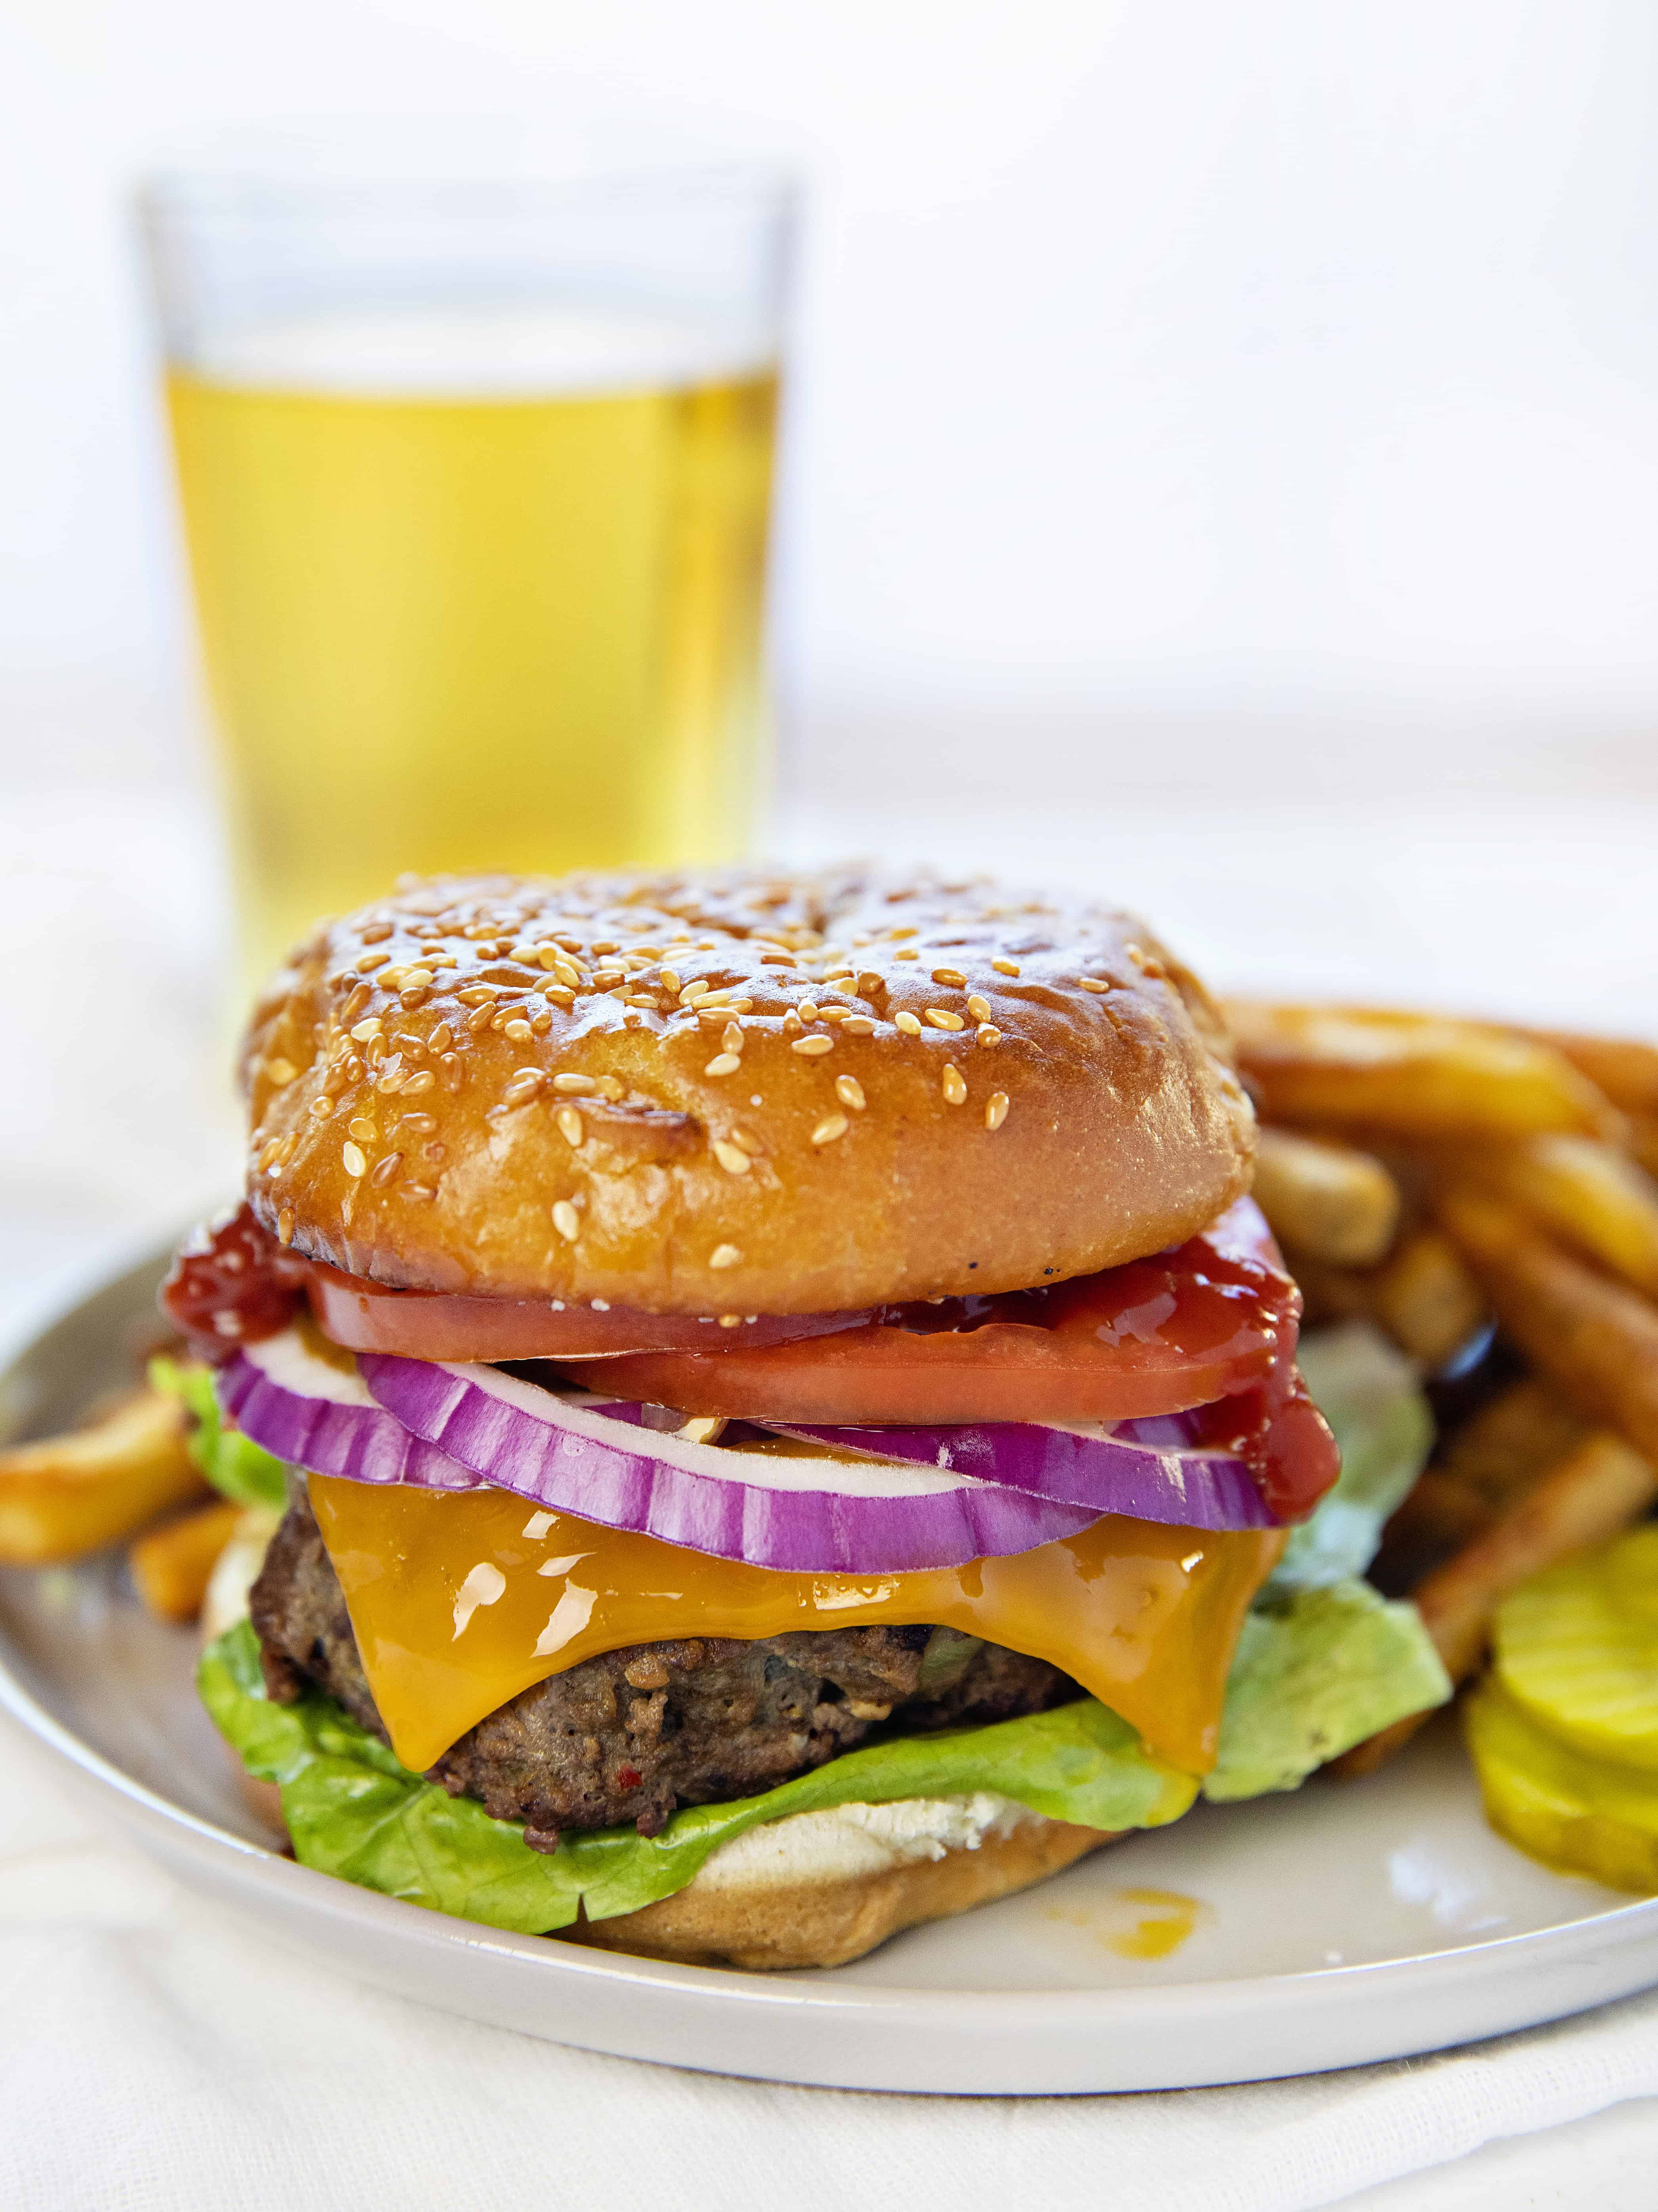 Classic Cheeseburger on a Plate with Beer